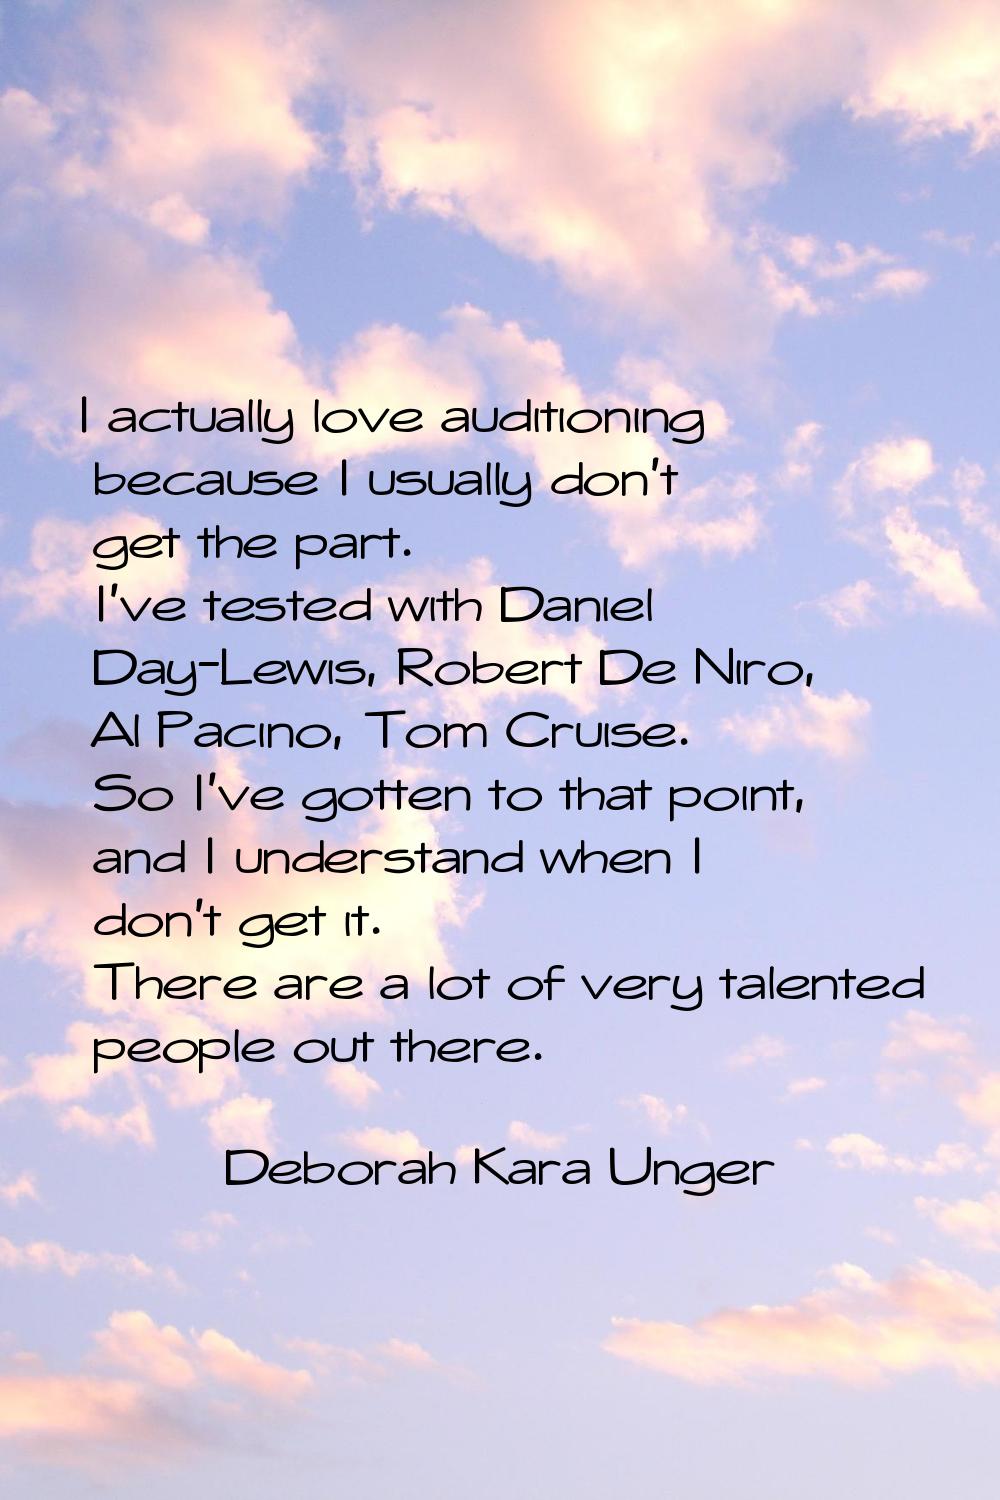 I actually love auditioning because I usually don't get the part. I've tested with Daniel Day-Lewis